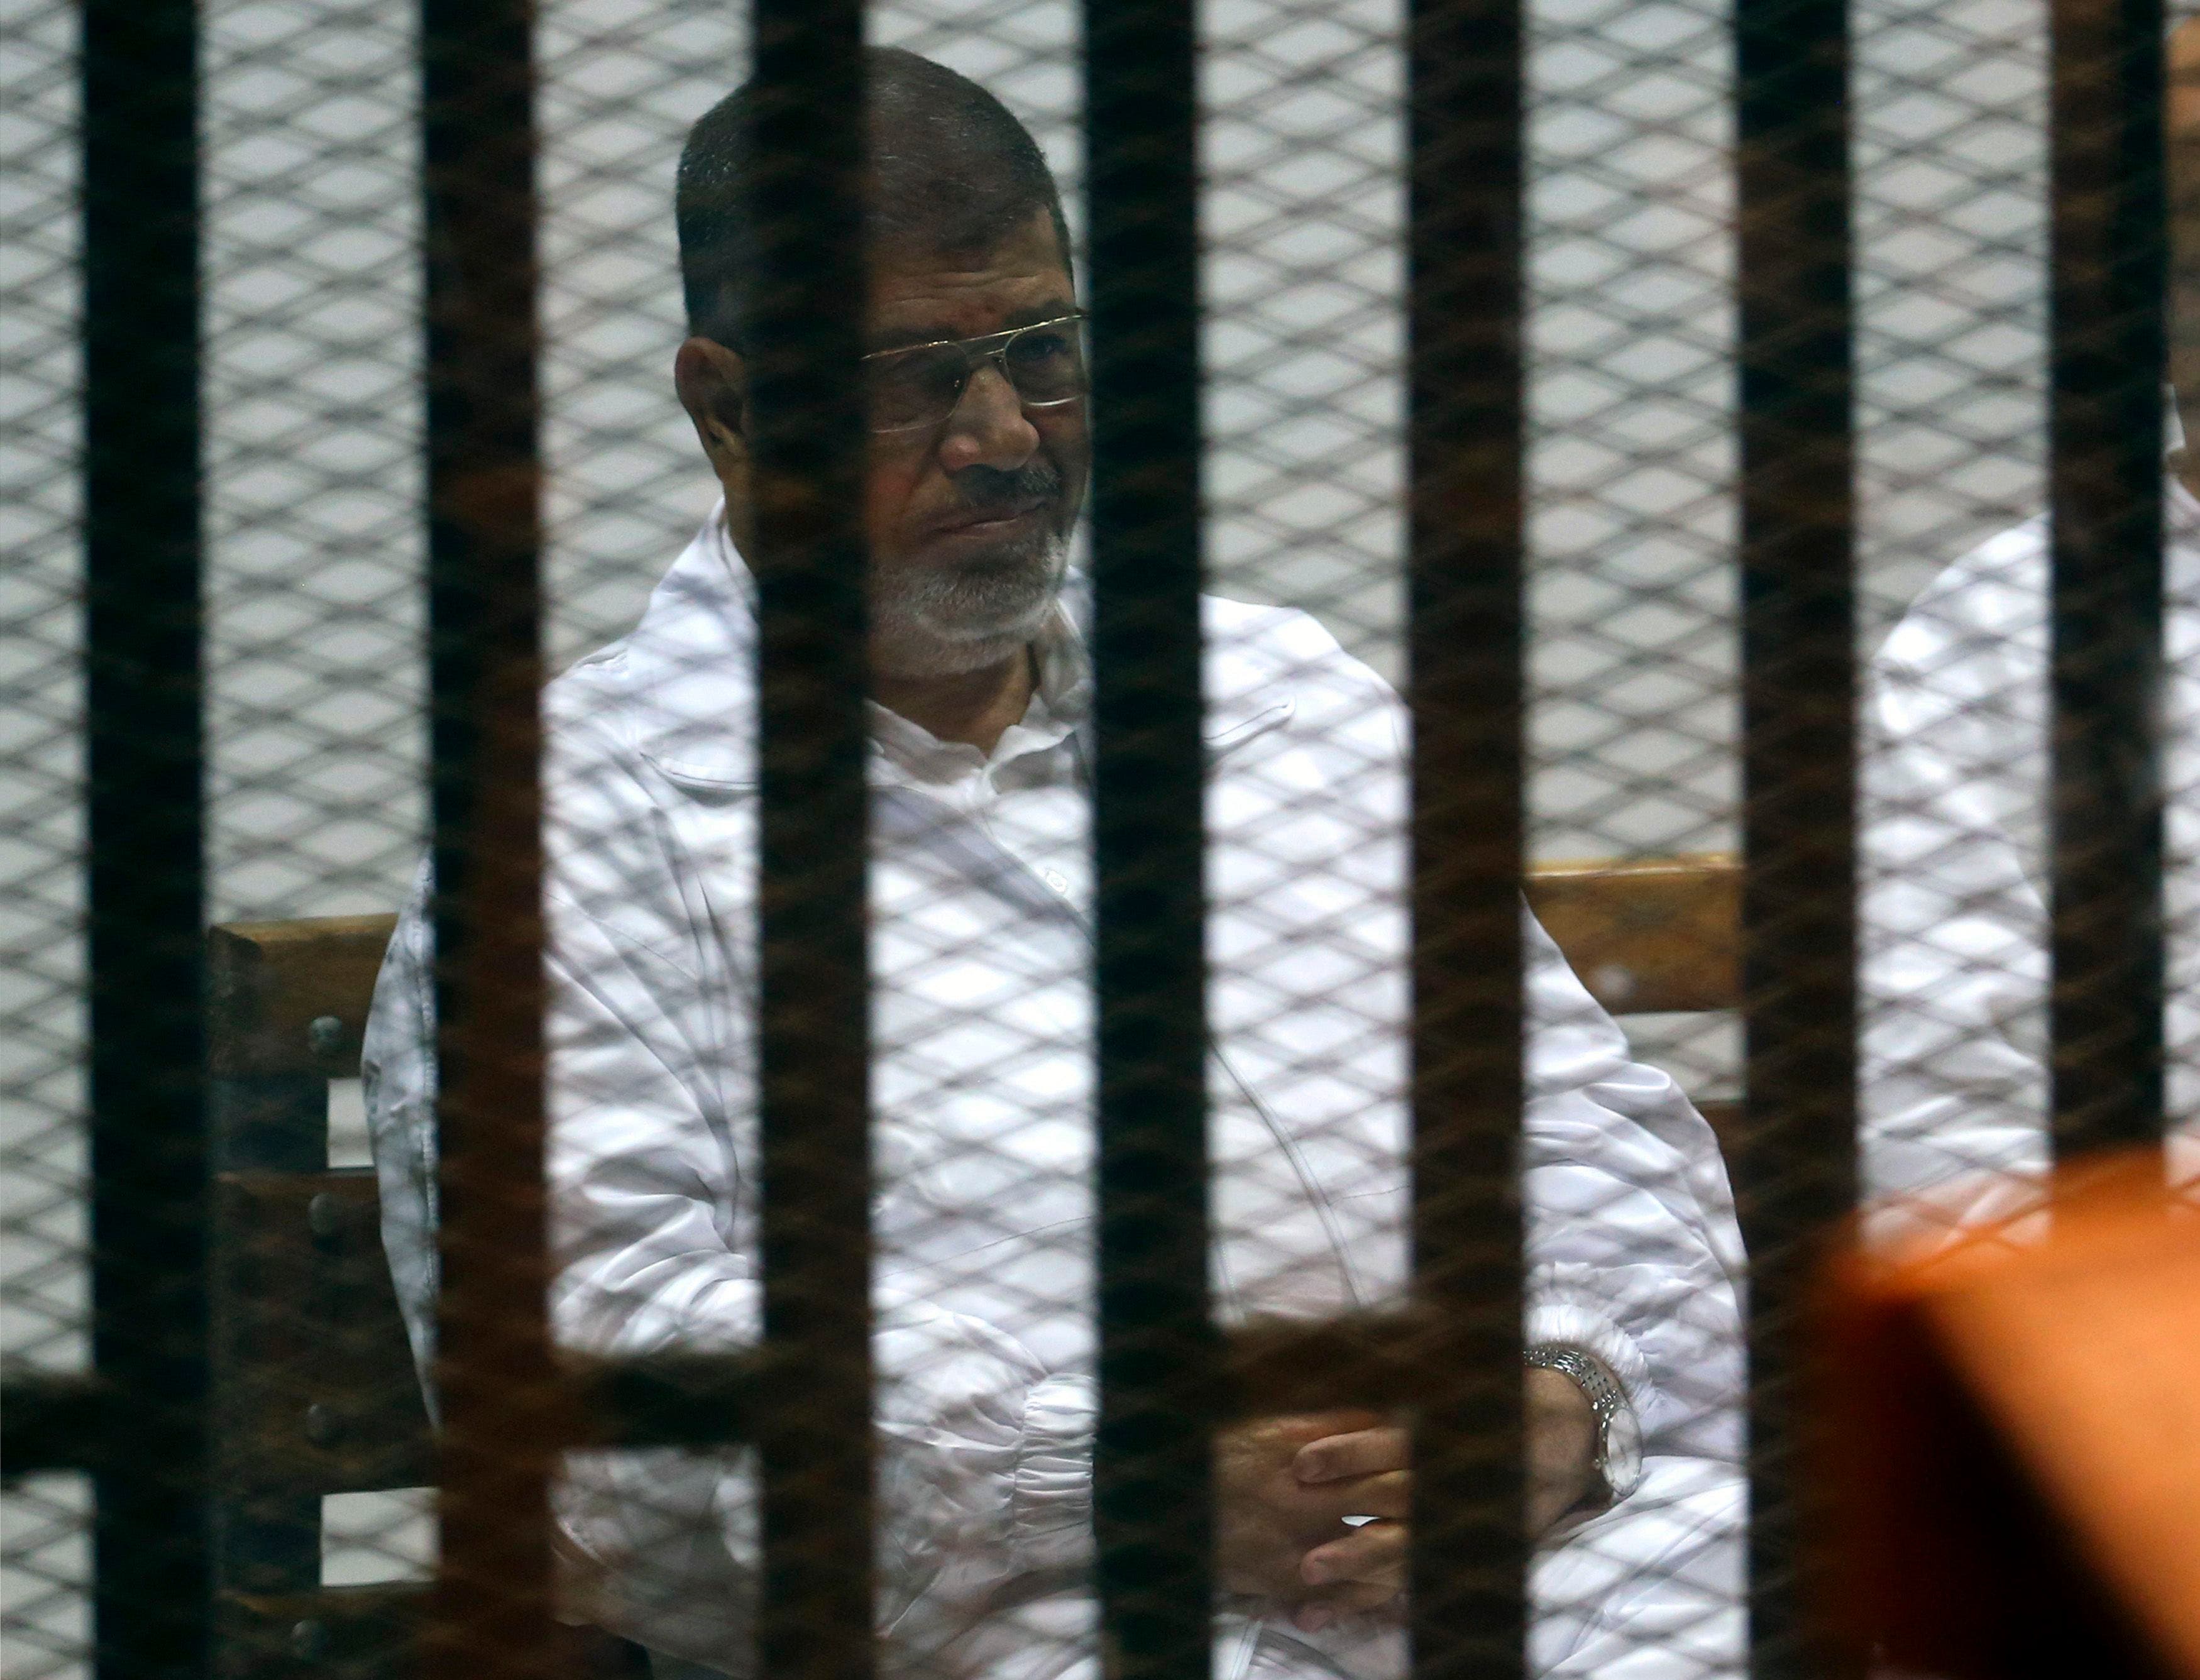 Former Egyptian President Mohamed Mursi sits behind bars with other Muslim Brotherhood members at a court in the outskirts of Cairo December 14, 2014. Egypt declared Mursi's Muslim Brotherhood a banned terrorist organization last December and Egyptian courts have sentenced hundreds of the group's members to death in mass trials that have drawn strong international criticism. Reuters